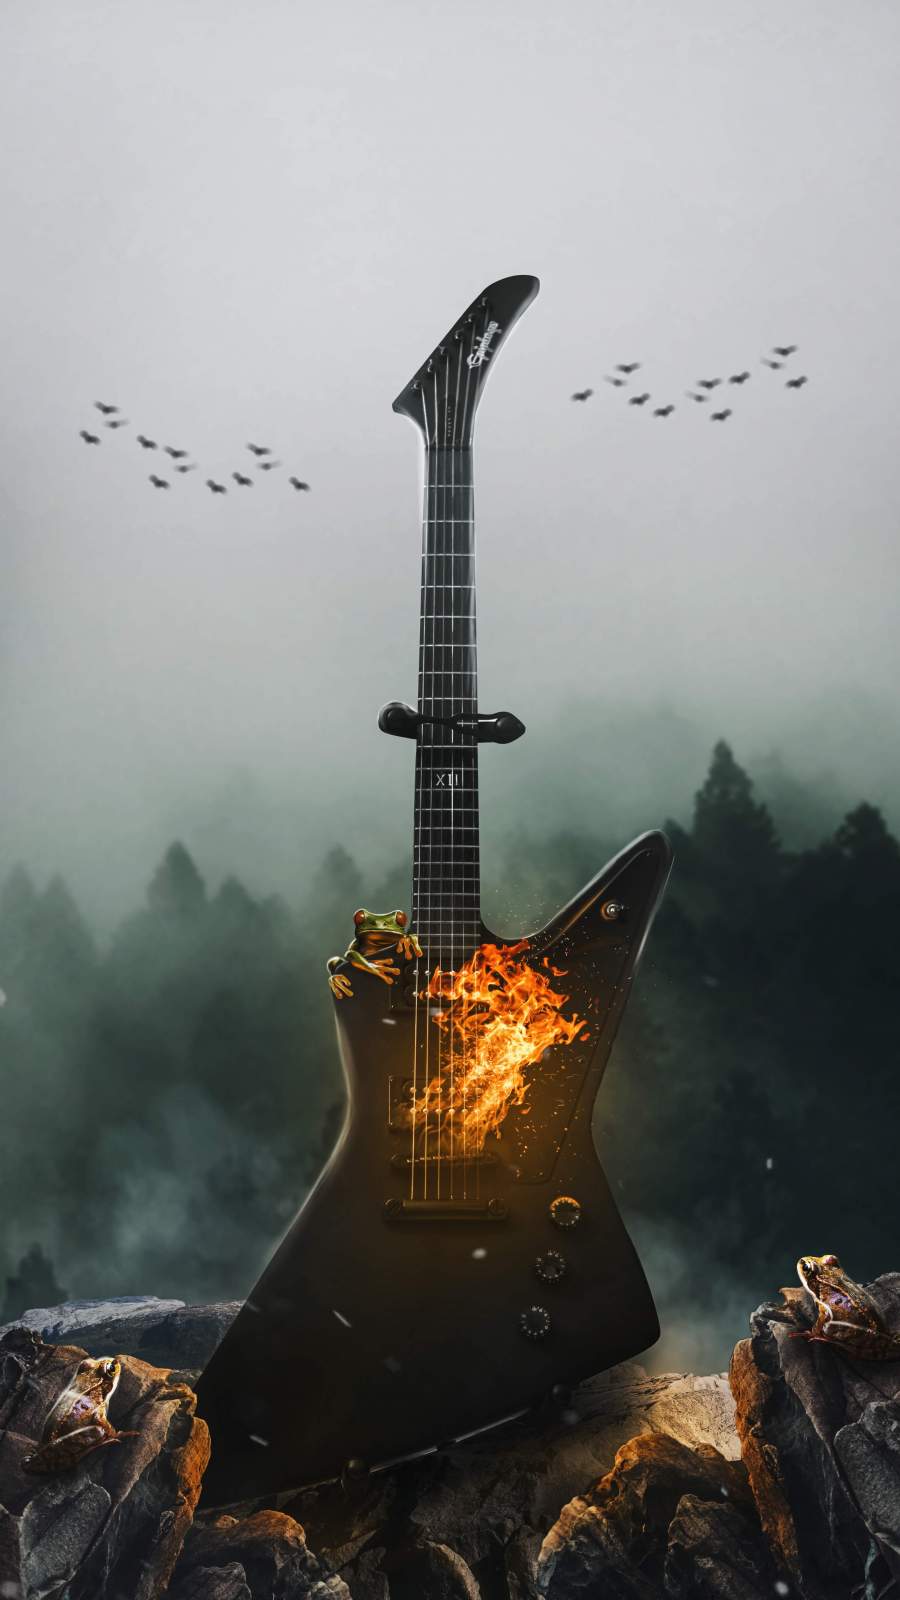 Electro Guitar - IPhone Wallpapers : iPhone Wallpapers